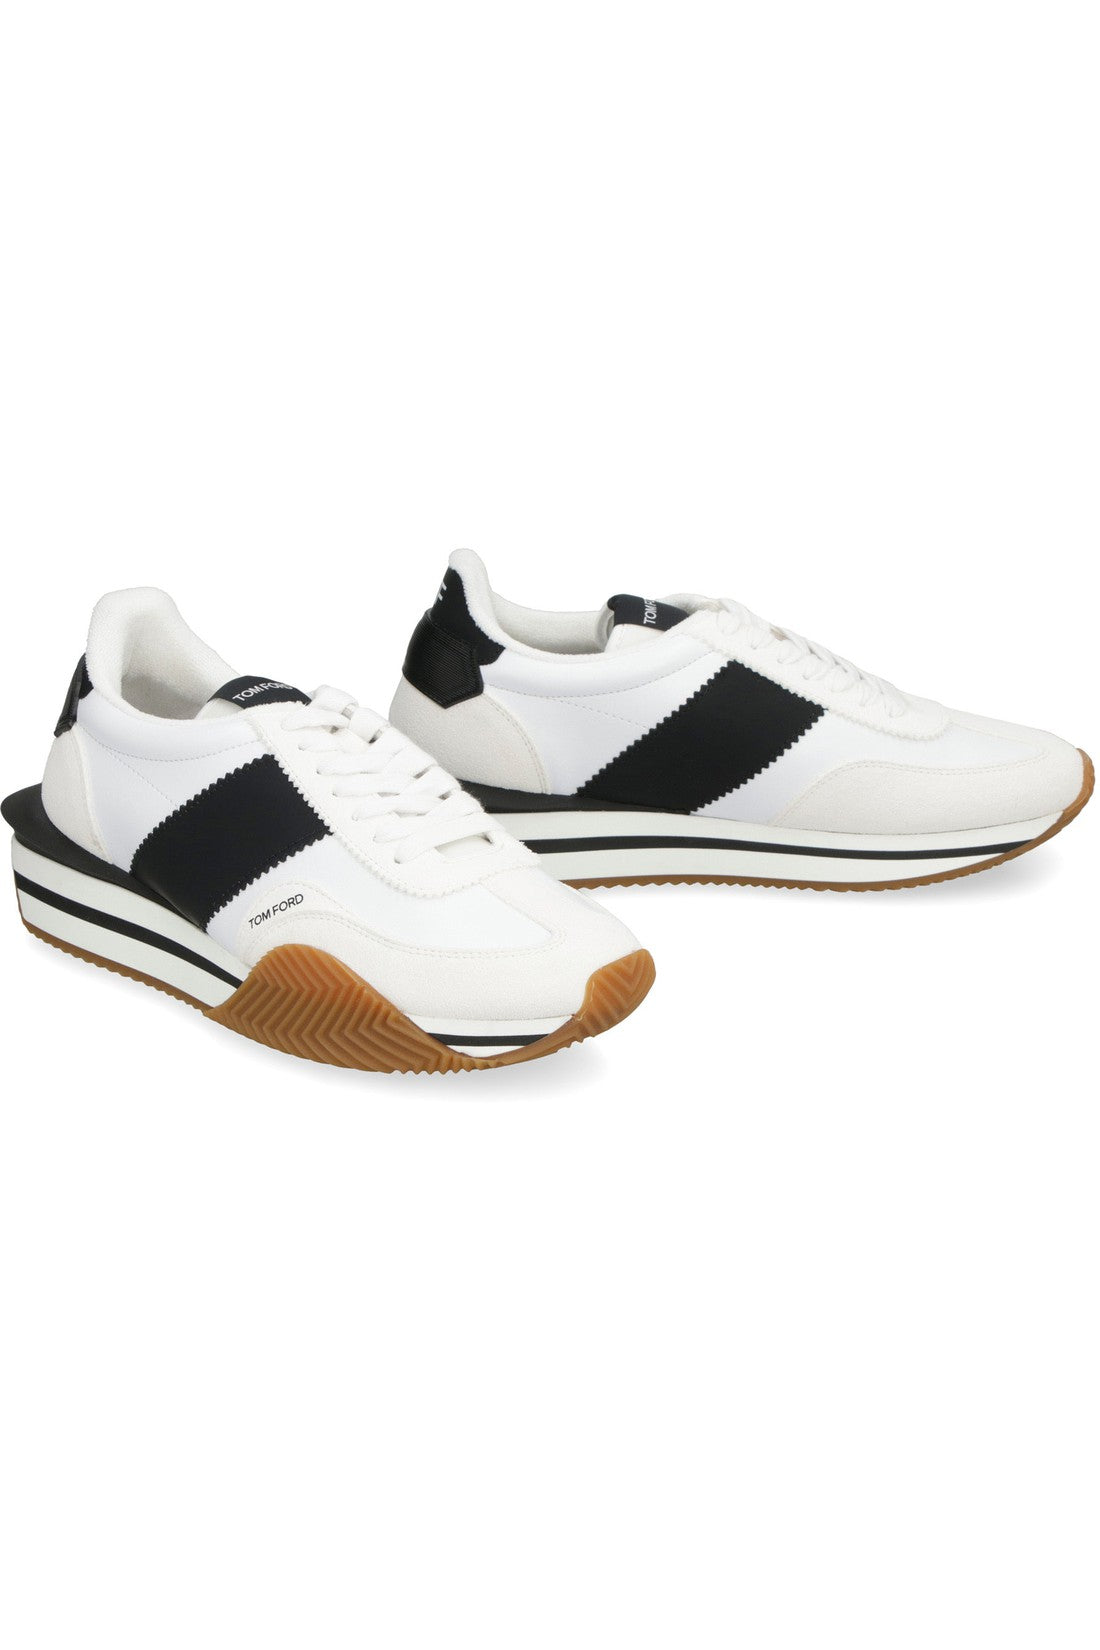 James leather low-top sneakers